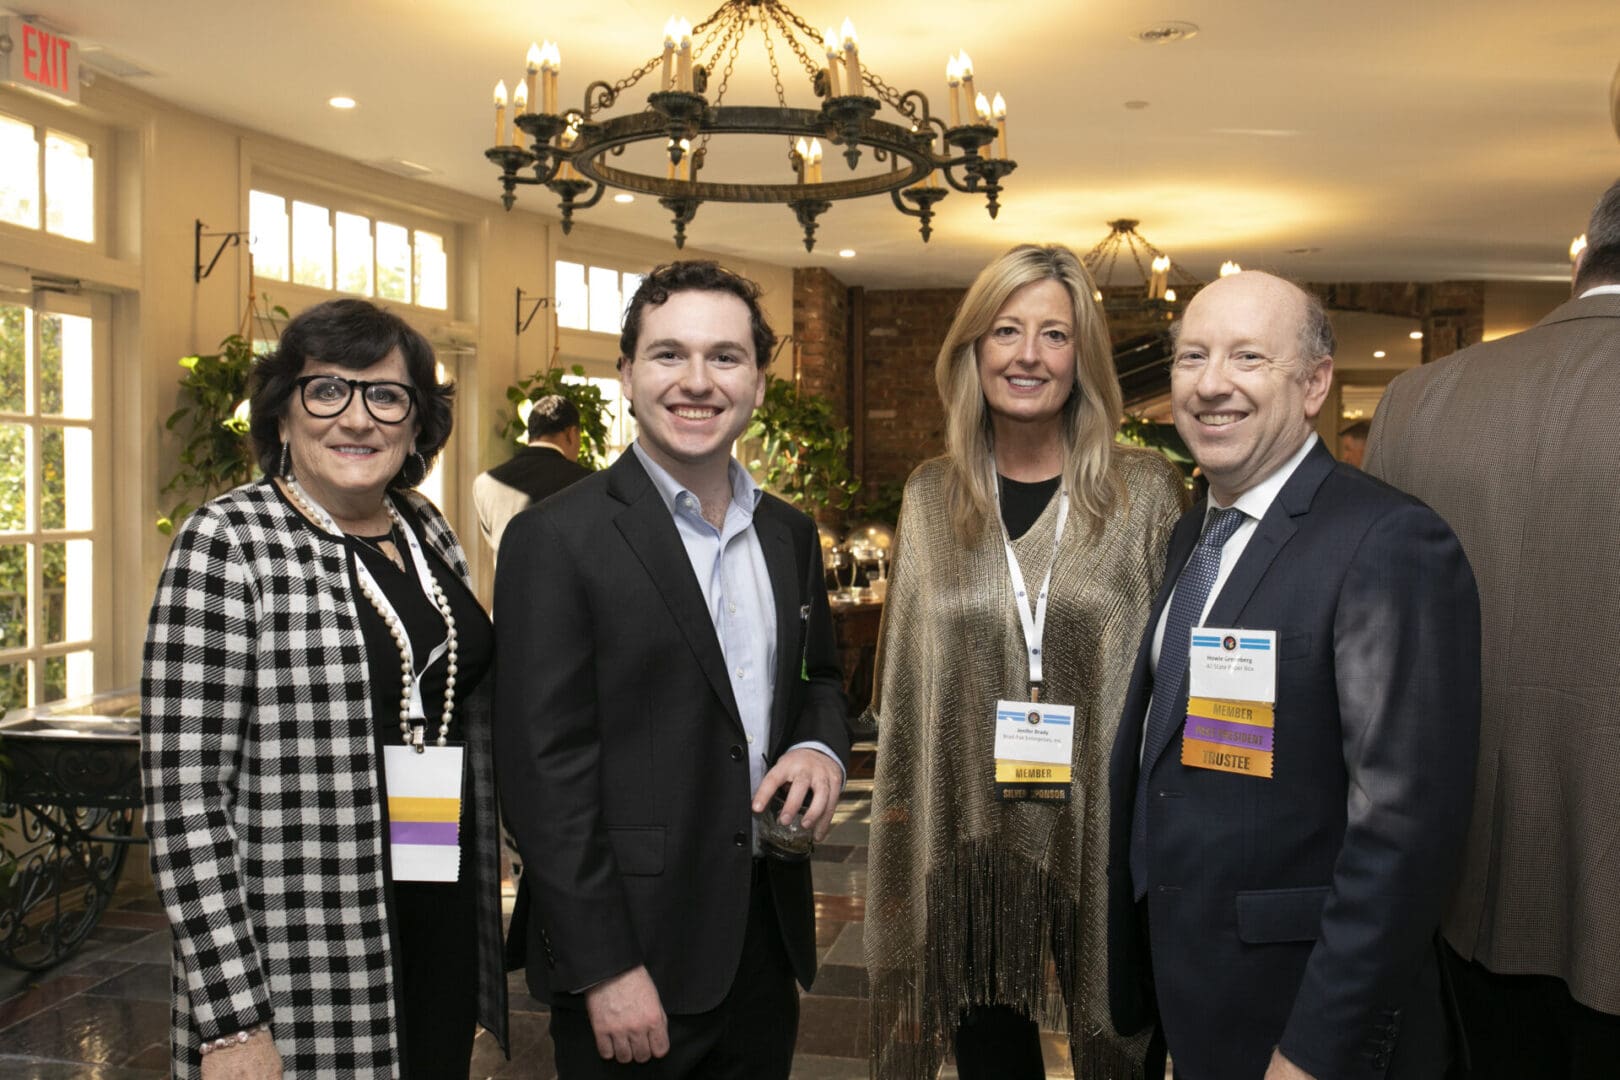 Four people standing together at a business event.